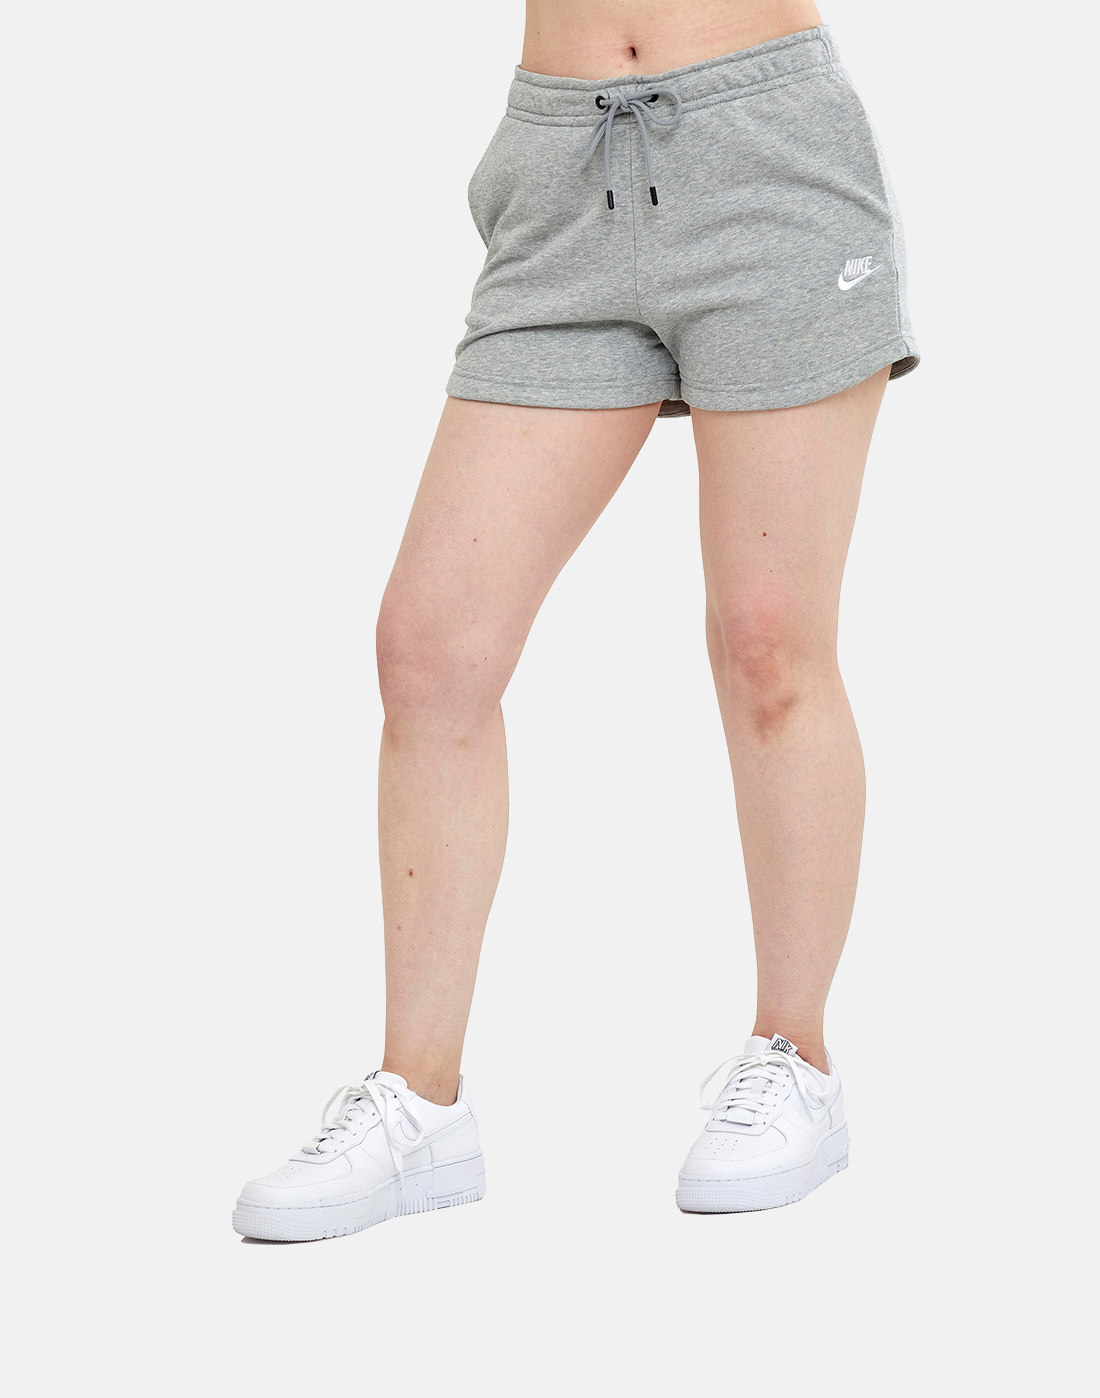 Nike Womens Essential Shorts - Grey | Life Style Sports IE